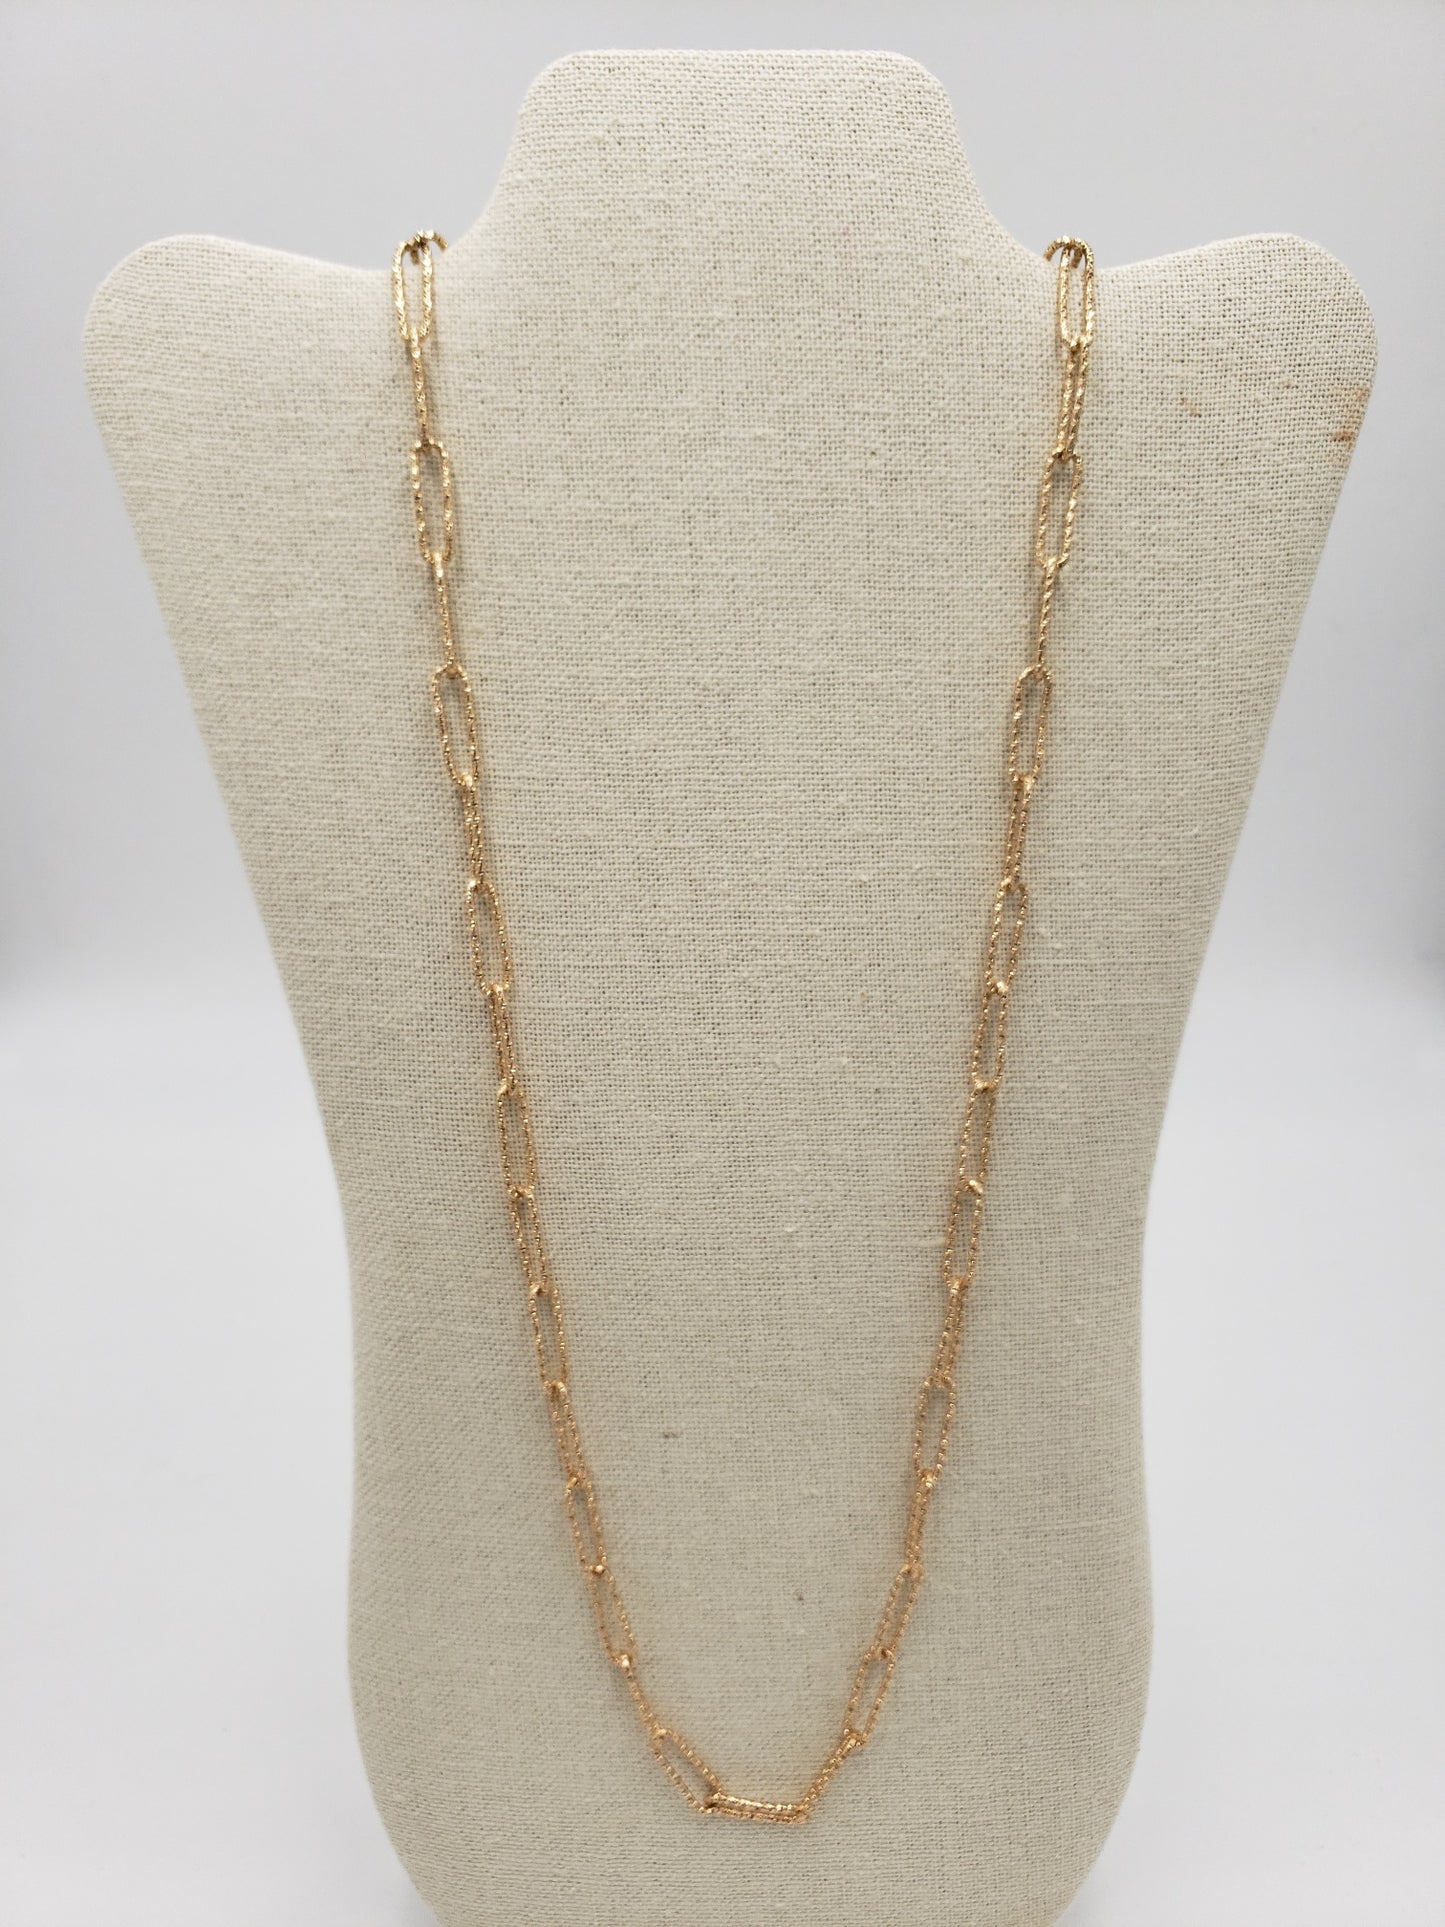 Etched Gold Necklace